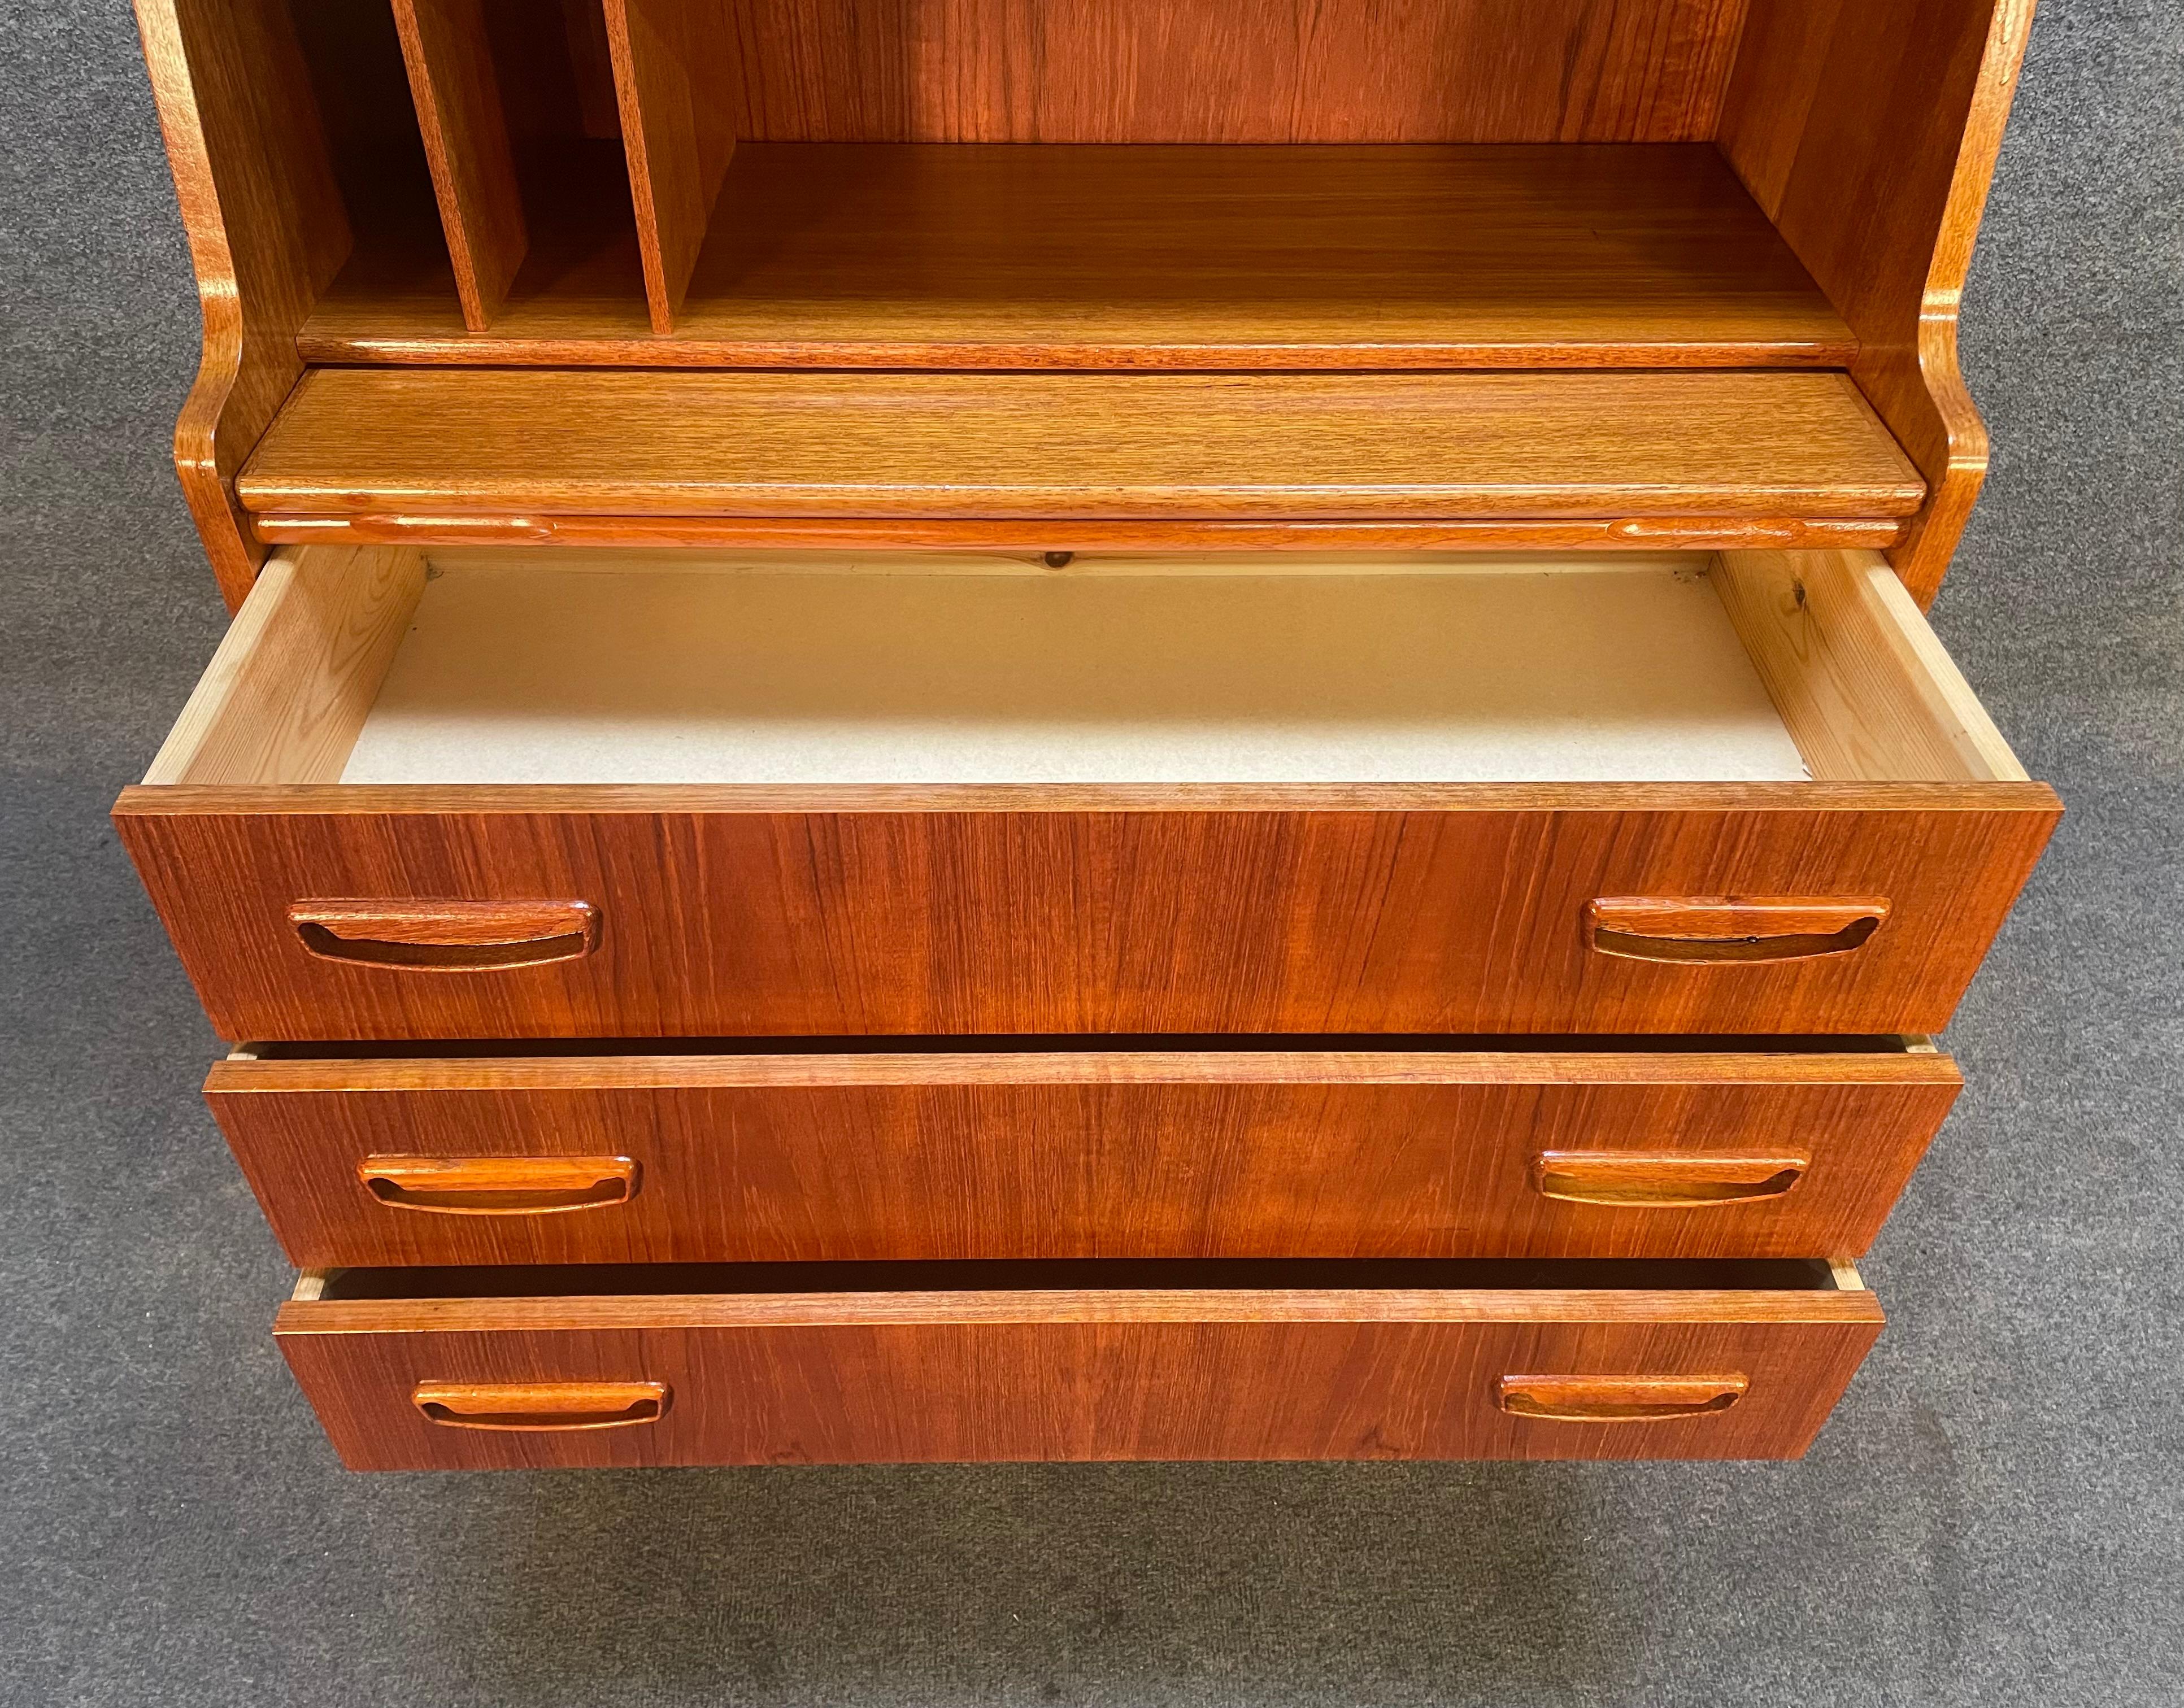 Here is a lovely petite Scandinavian modern secretary isn teak wood manufactured in Denmark in the 1960's.
This charming piece, recently imported from Europe to California before its refinishing, features a vibrant wood grain, two small top